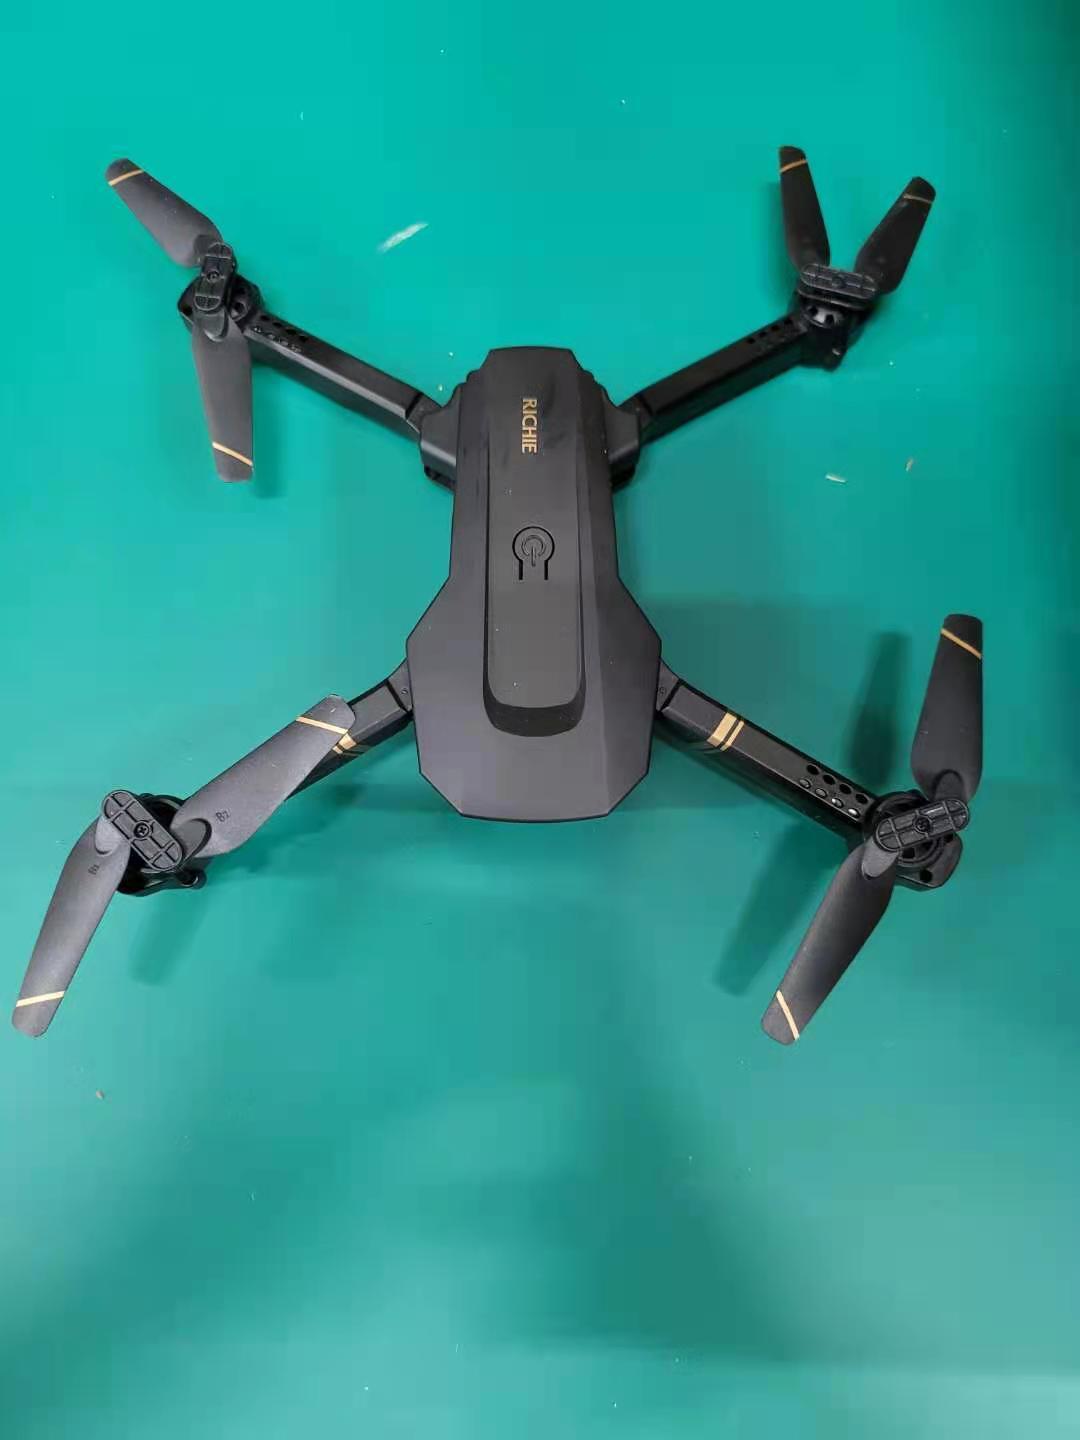 4k HD Camera Brushless GPS Drone by 4DRC